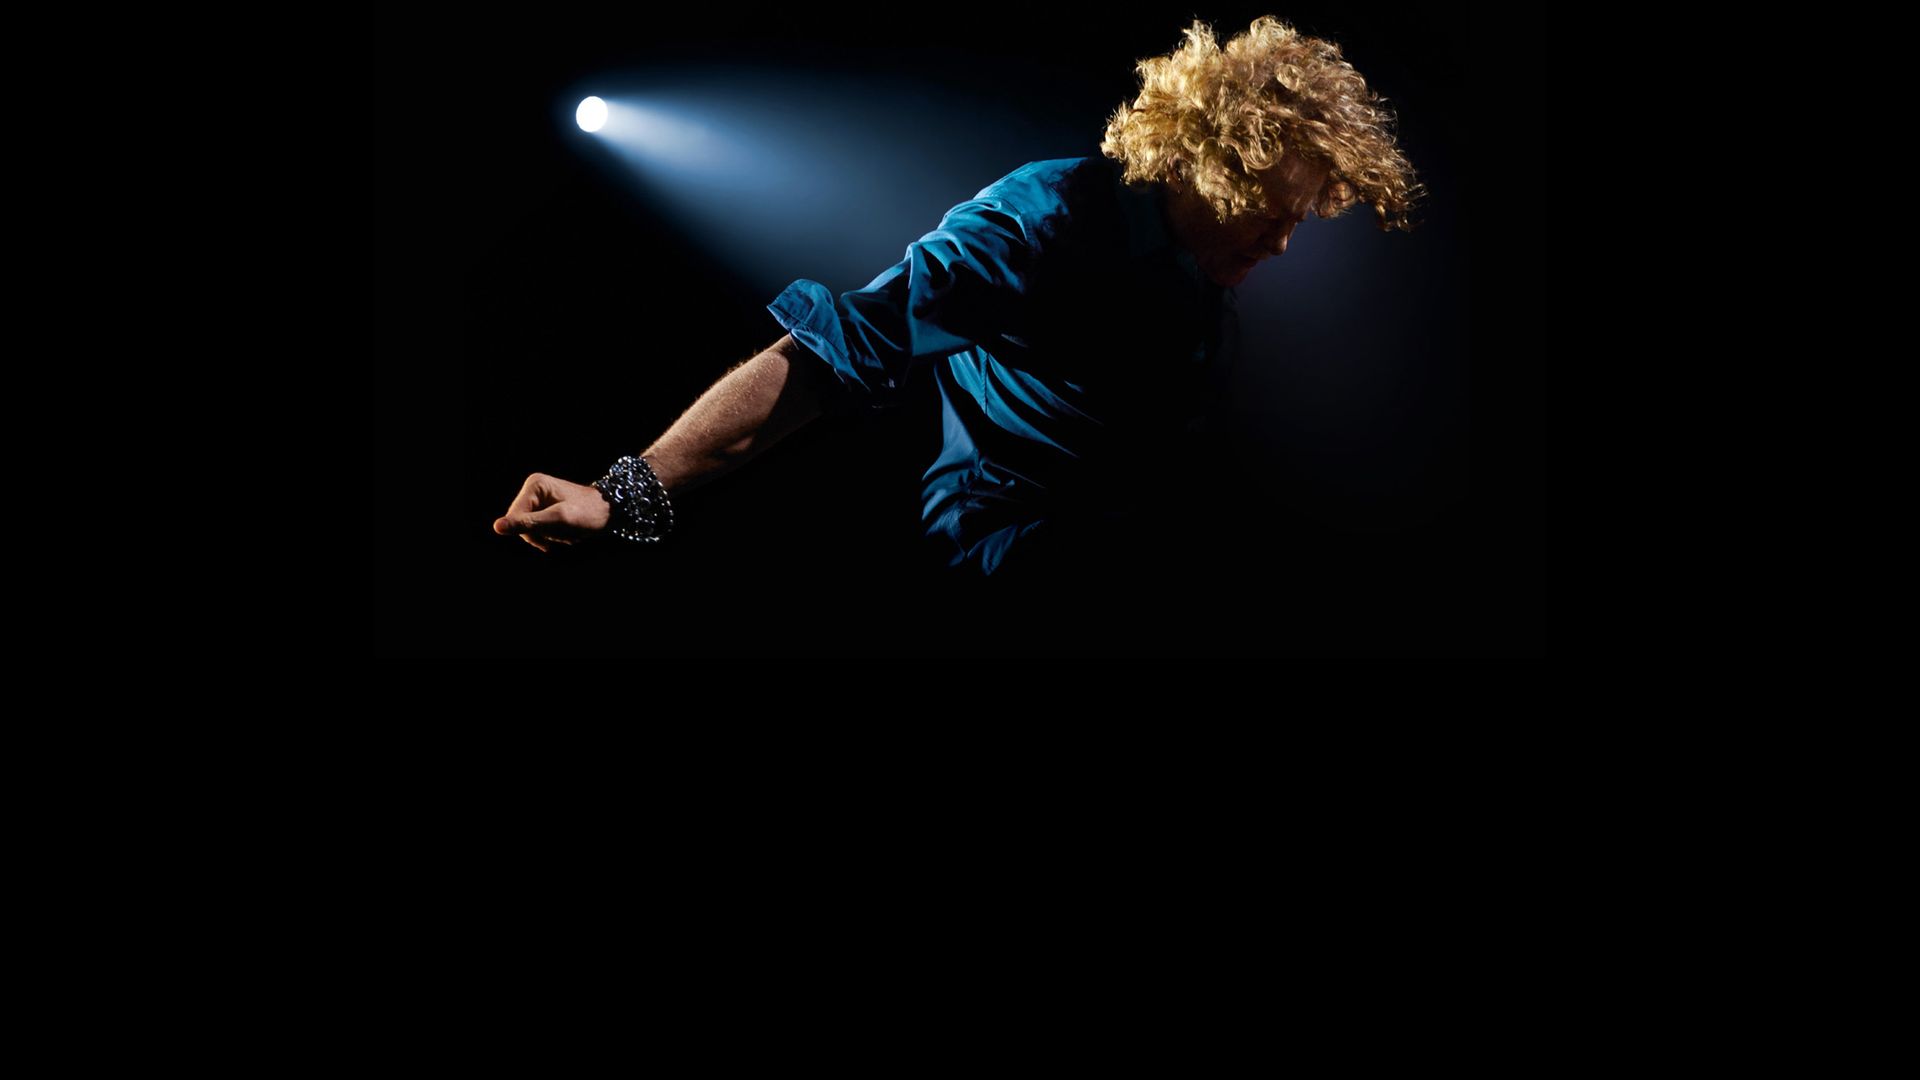 simply red 40th tour